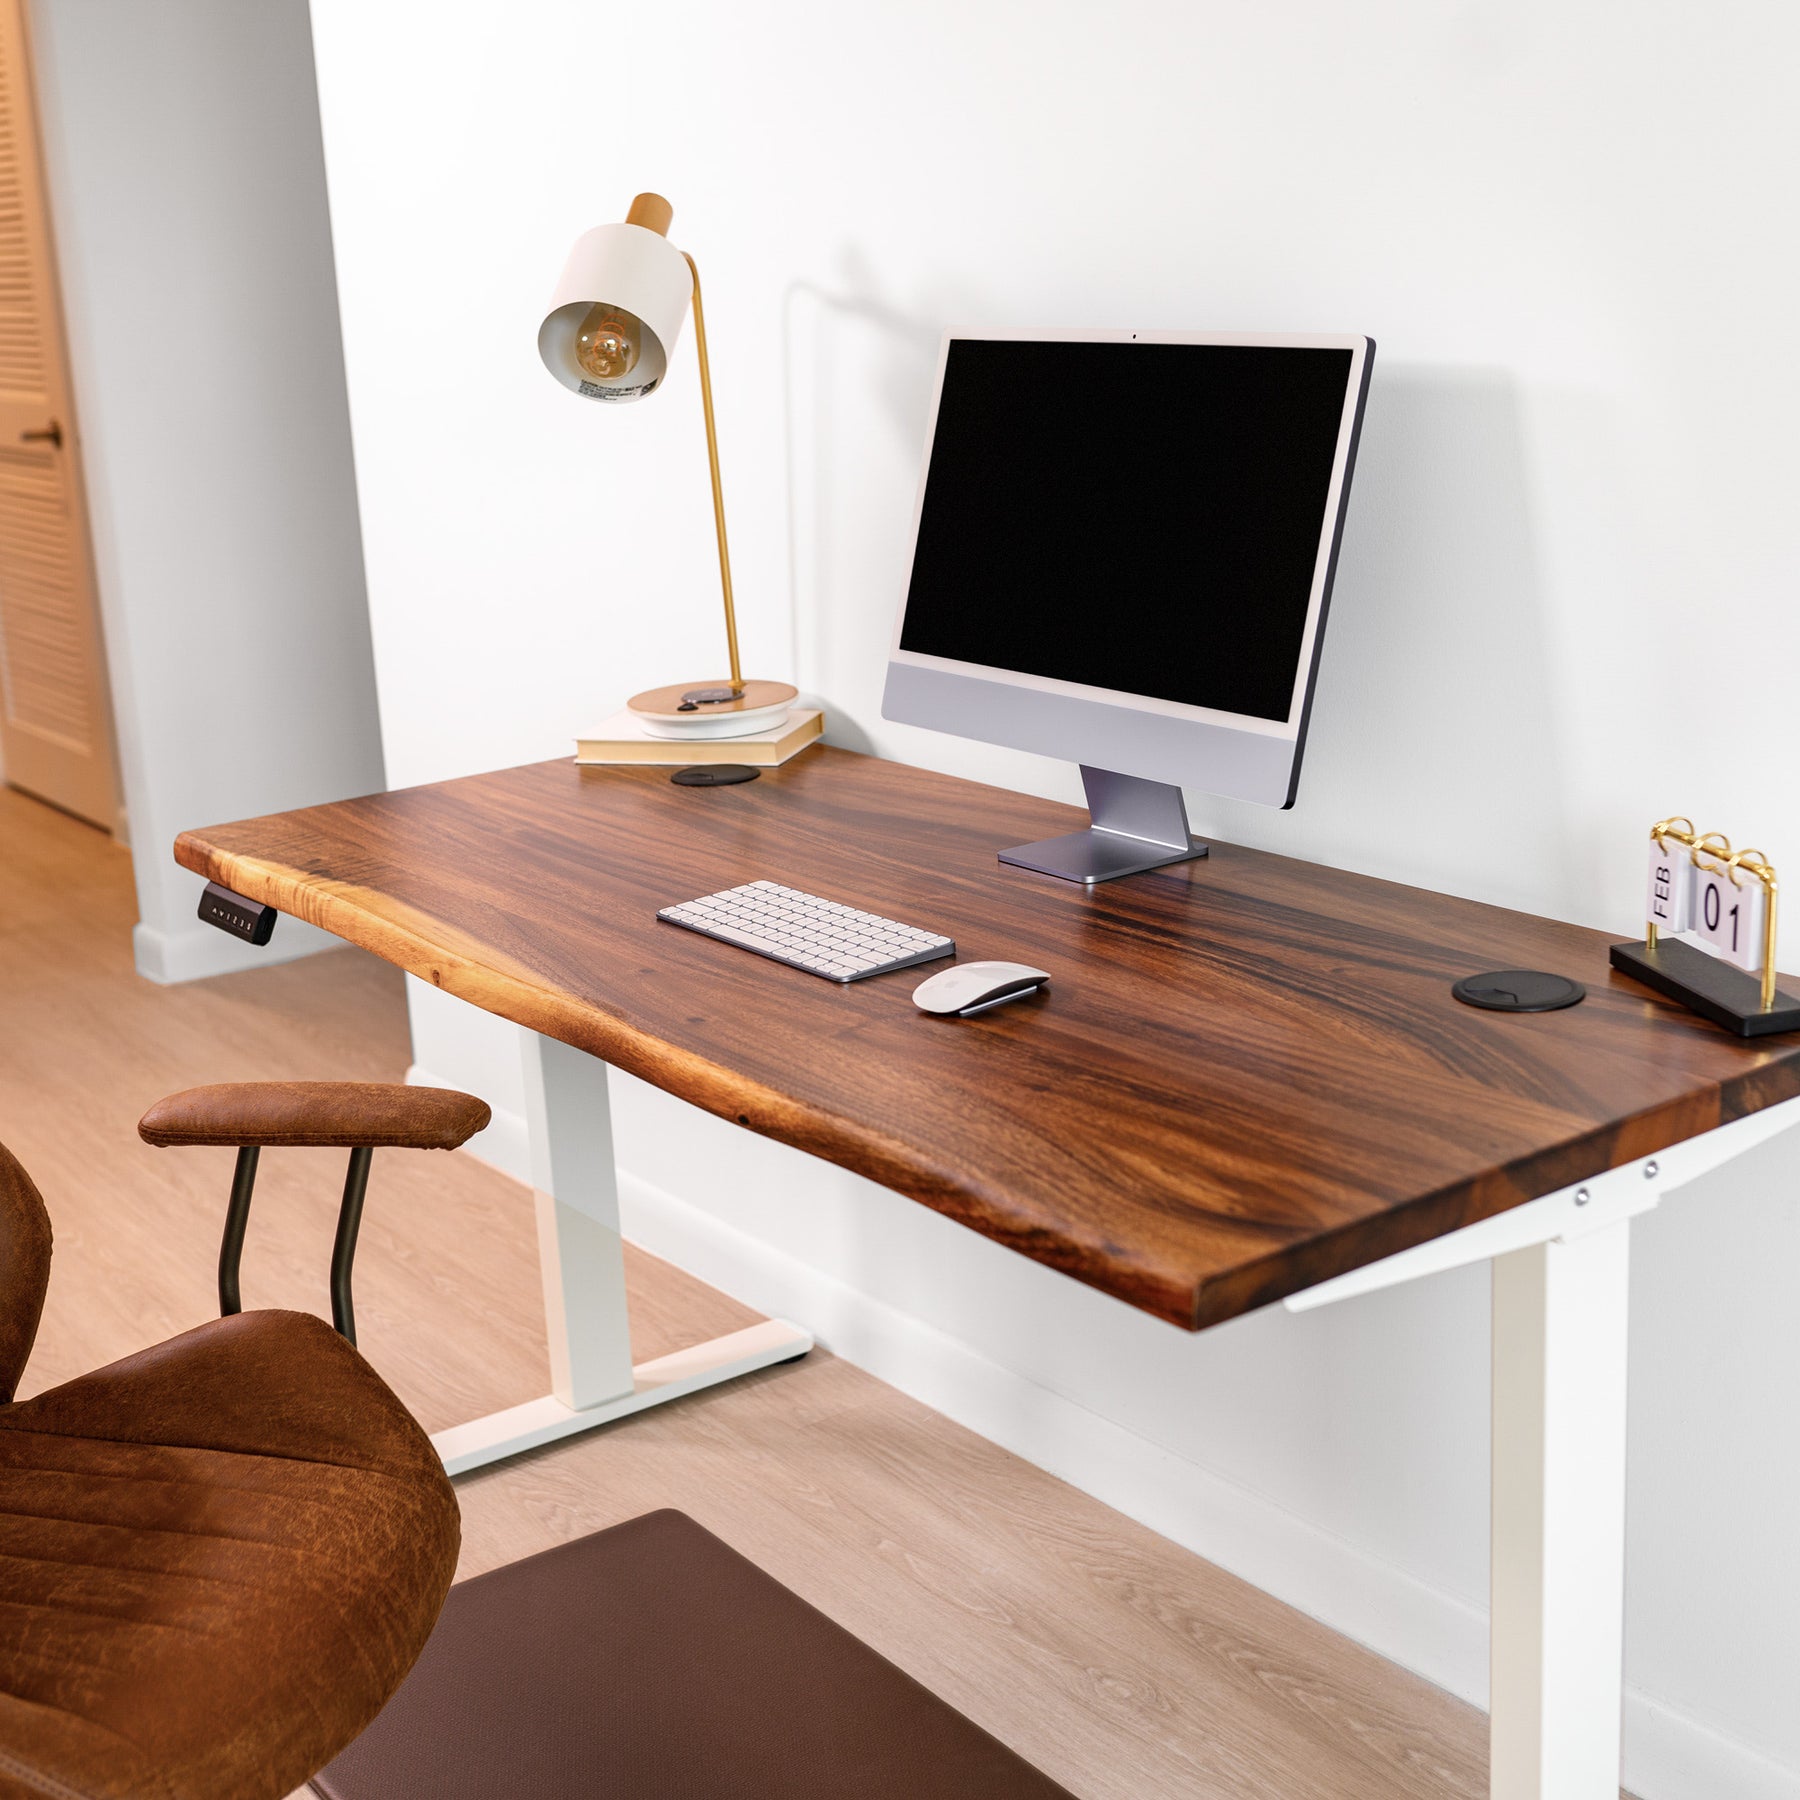 Ergonomic solid wood desk with a natural live edge in walnut brown, ideal for stylish workspaces